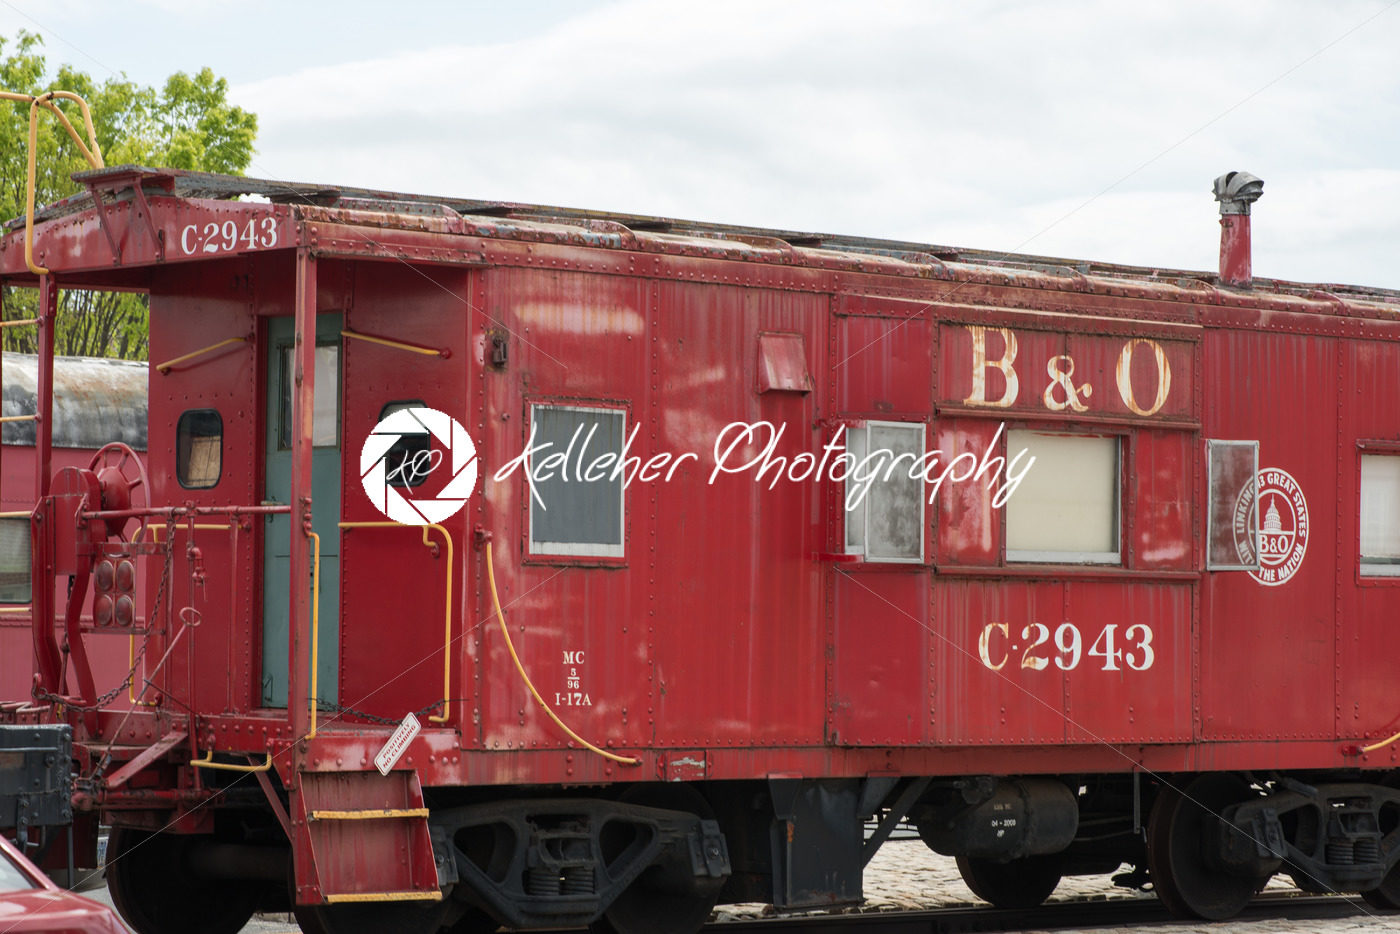 BALITMORE, MD – APRIL 15: B O Number C-2943 Caboose Baltimore Ohio Railroad on April 15, 2017 - Kelleher Photography Store